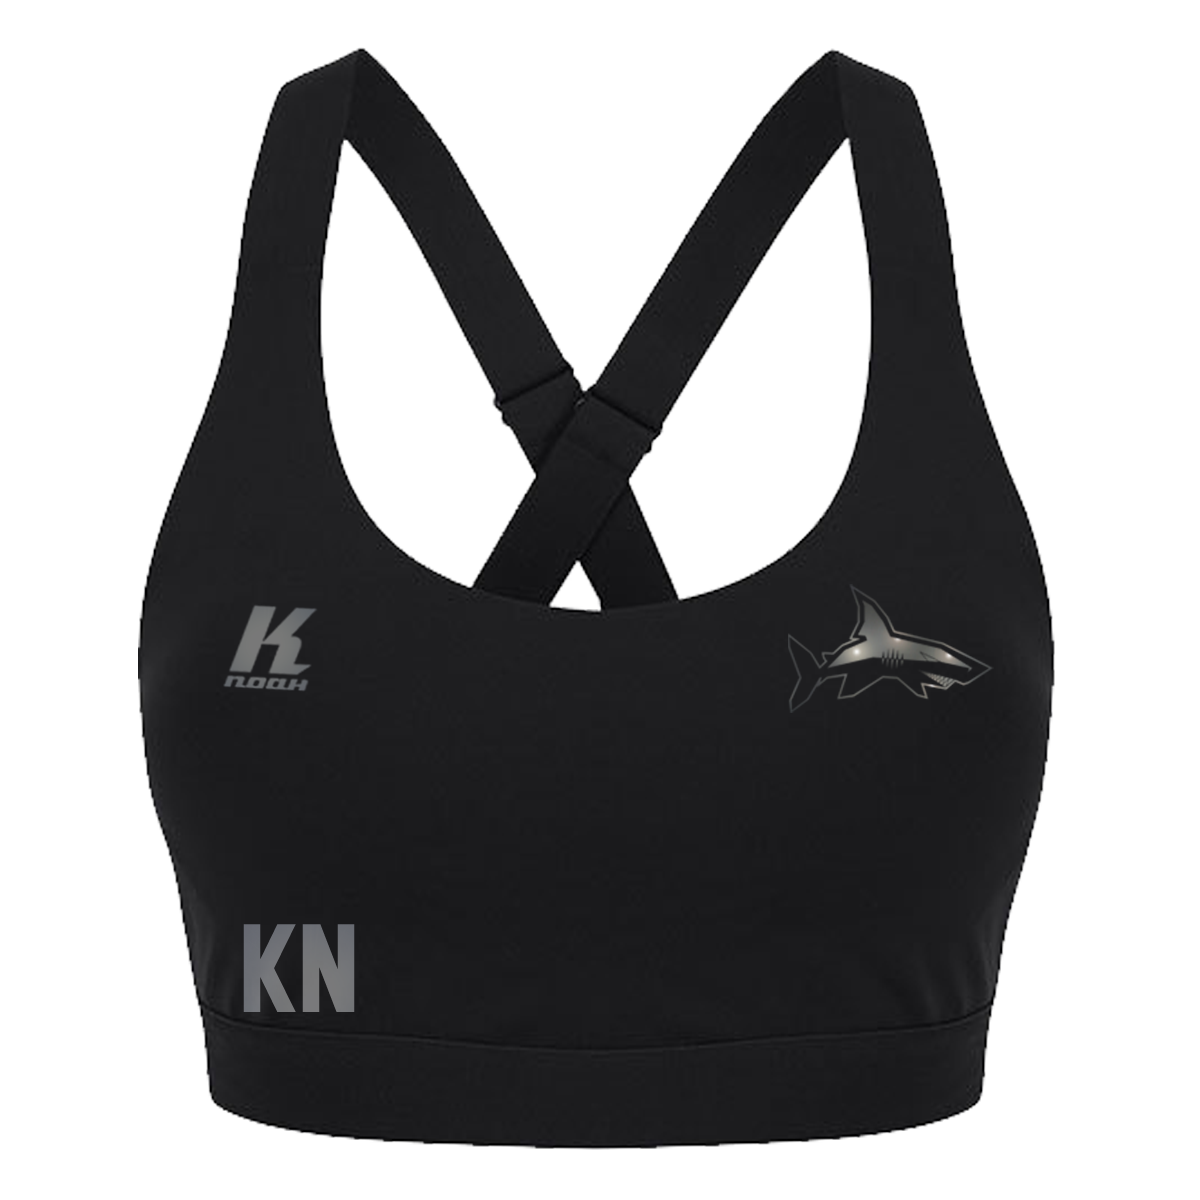 Sharks "Blackline" Womens Impact Core Bra TL371 with Initials/Playernumber